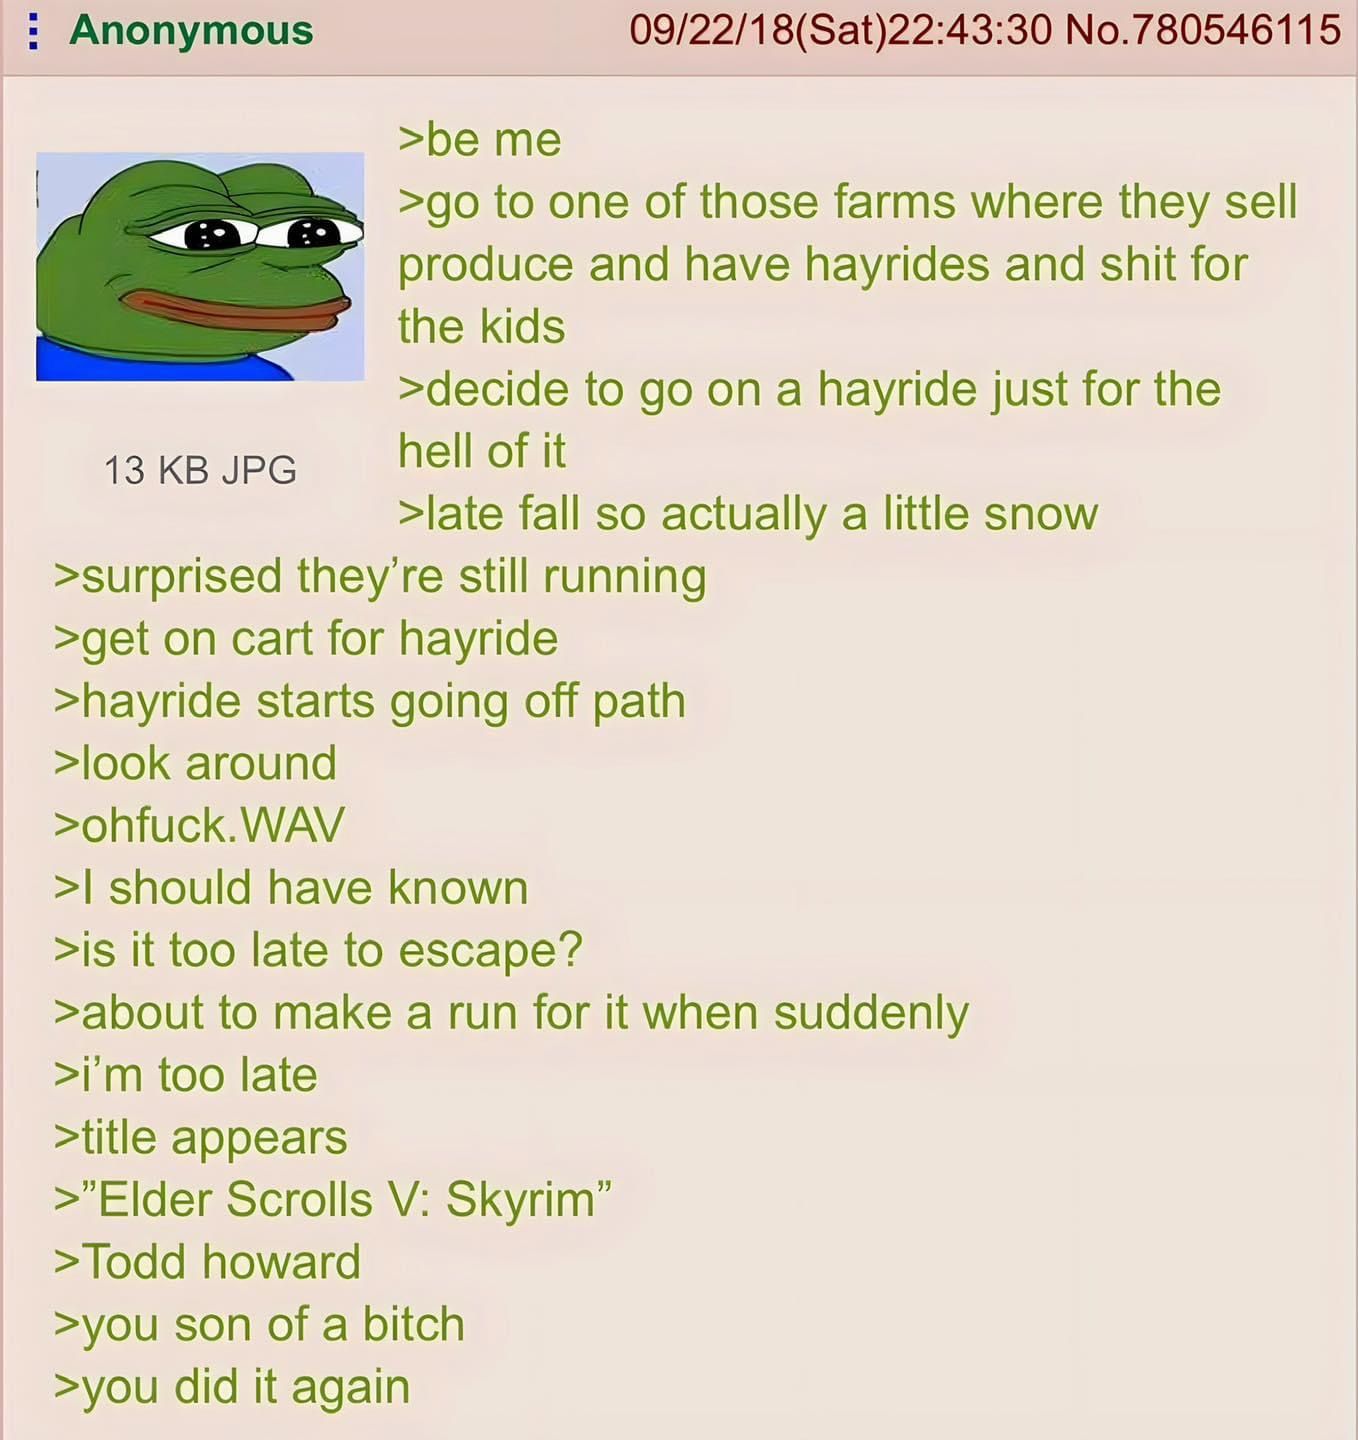 Anon goes to a farm